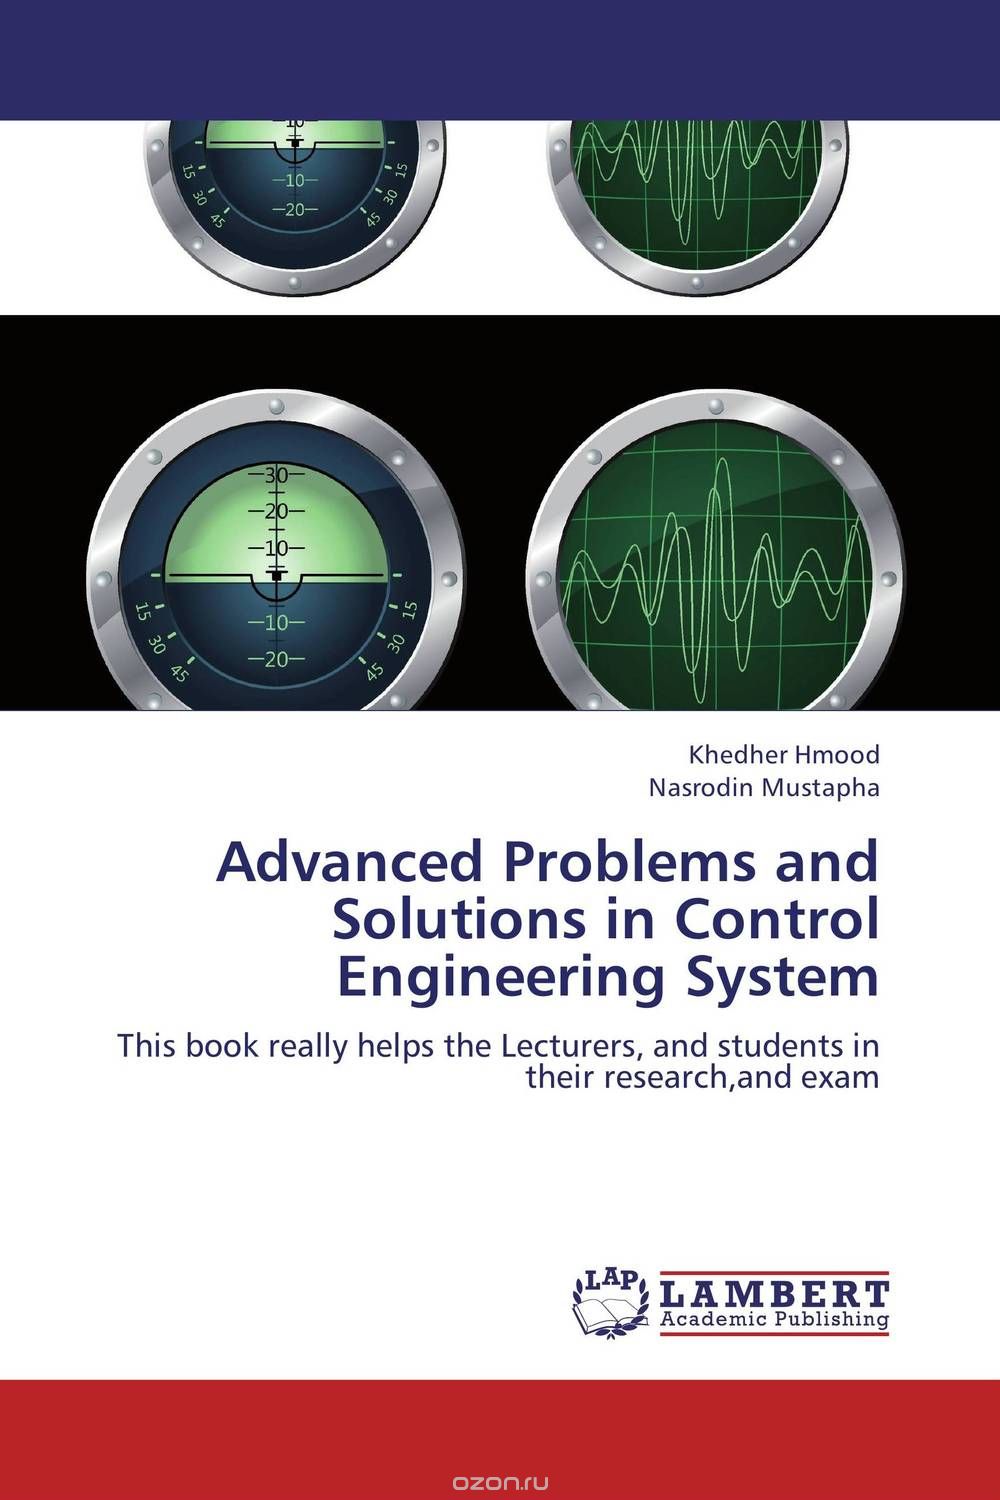 Скачать книгу "Advanced Problems and Solutions in Control Engineering  System"